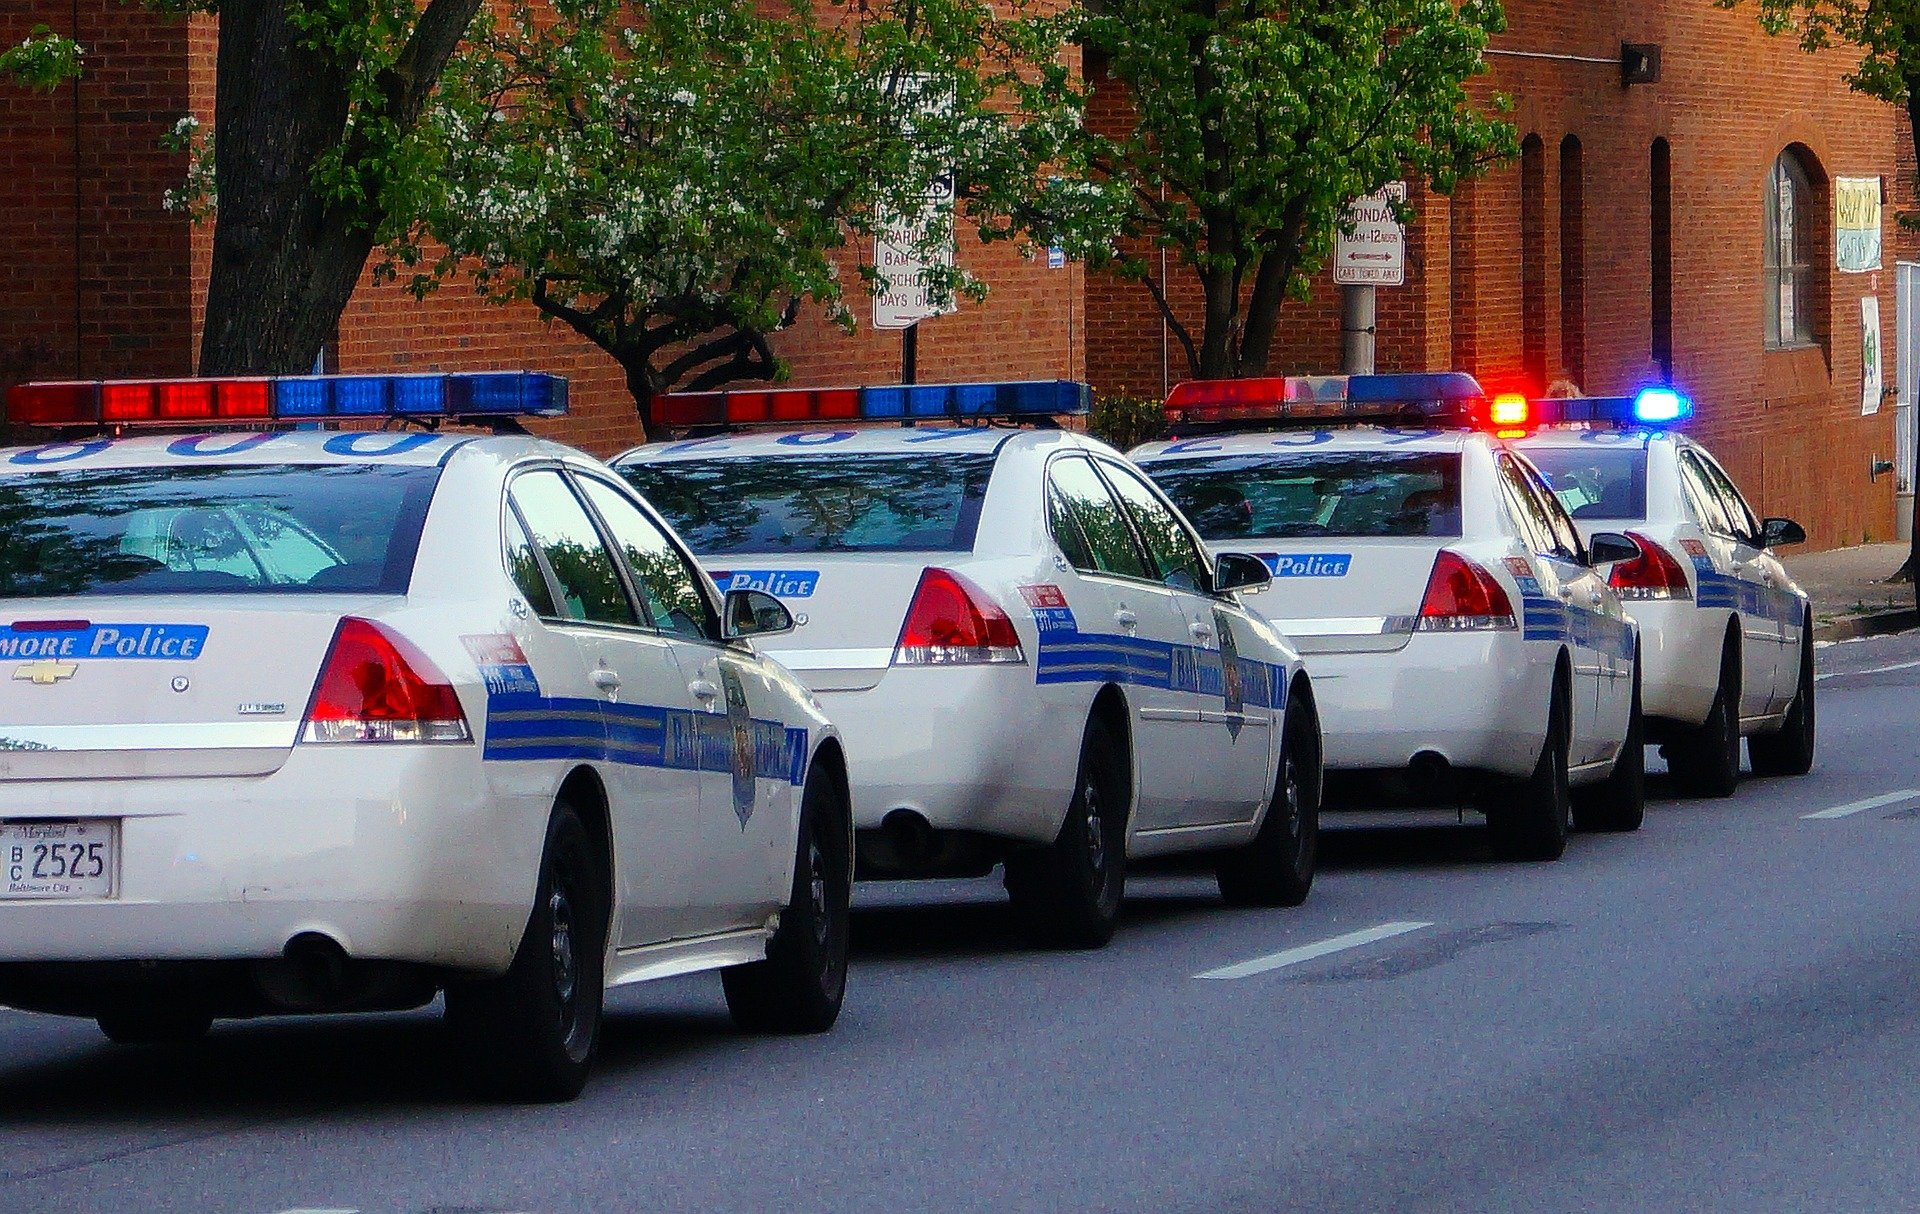 Police vehicles on the street in Baltimore | Source: Pixabay